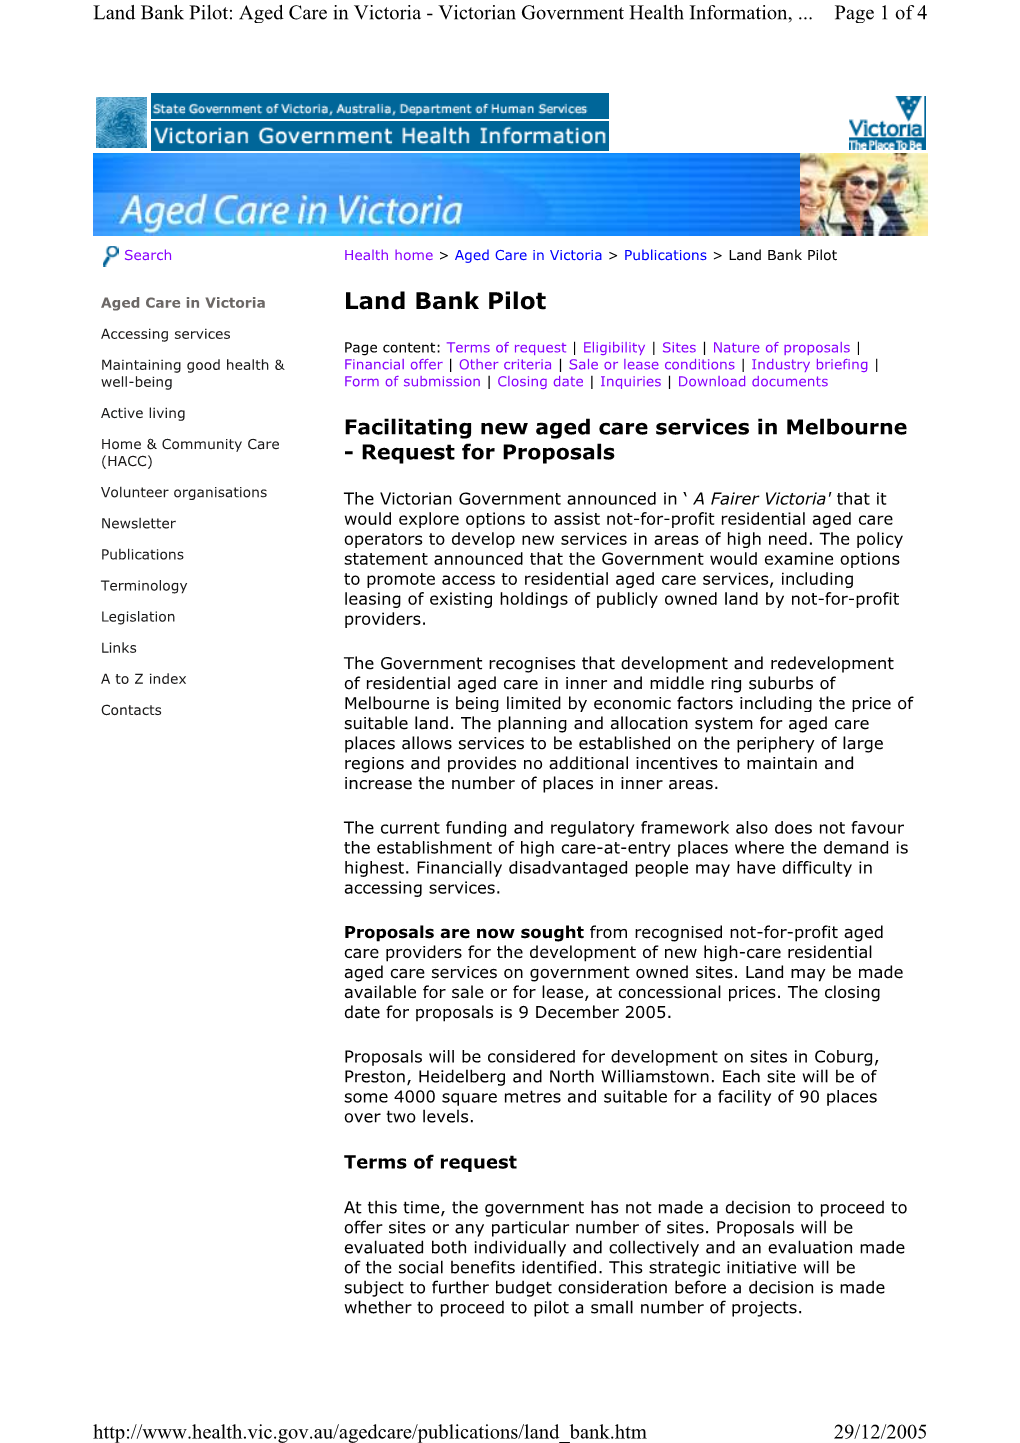 Land Bank Pilot: Aged Care in Victoria - Victorian Government Health Information,